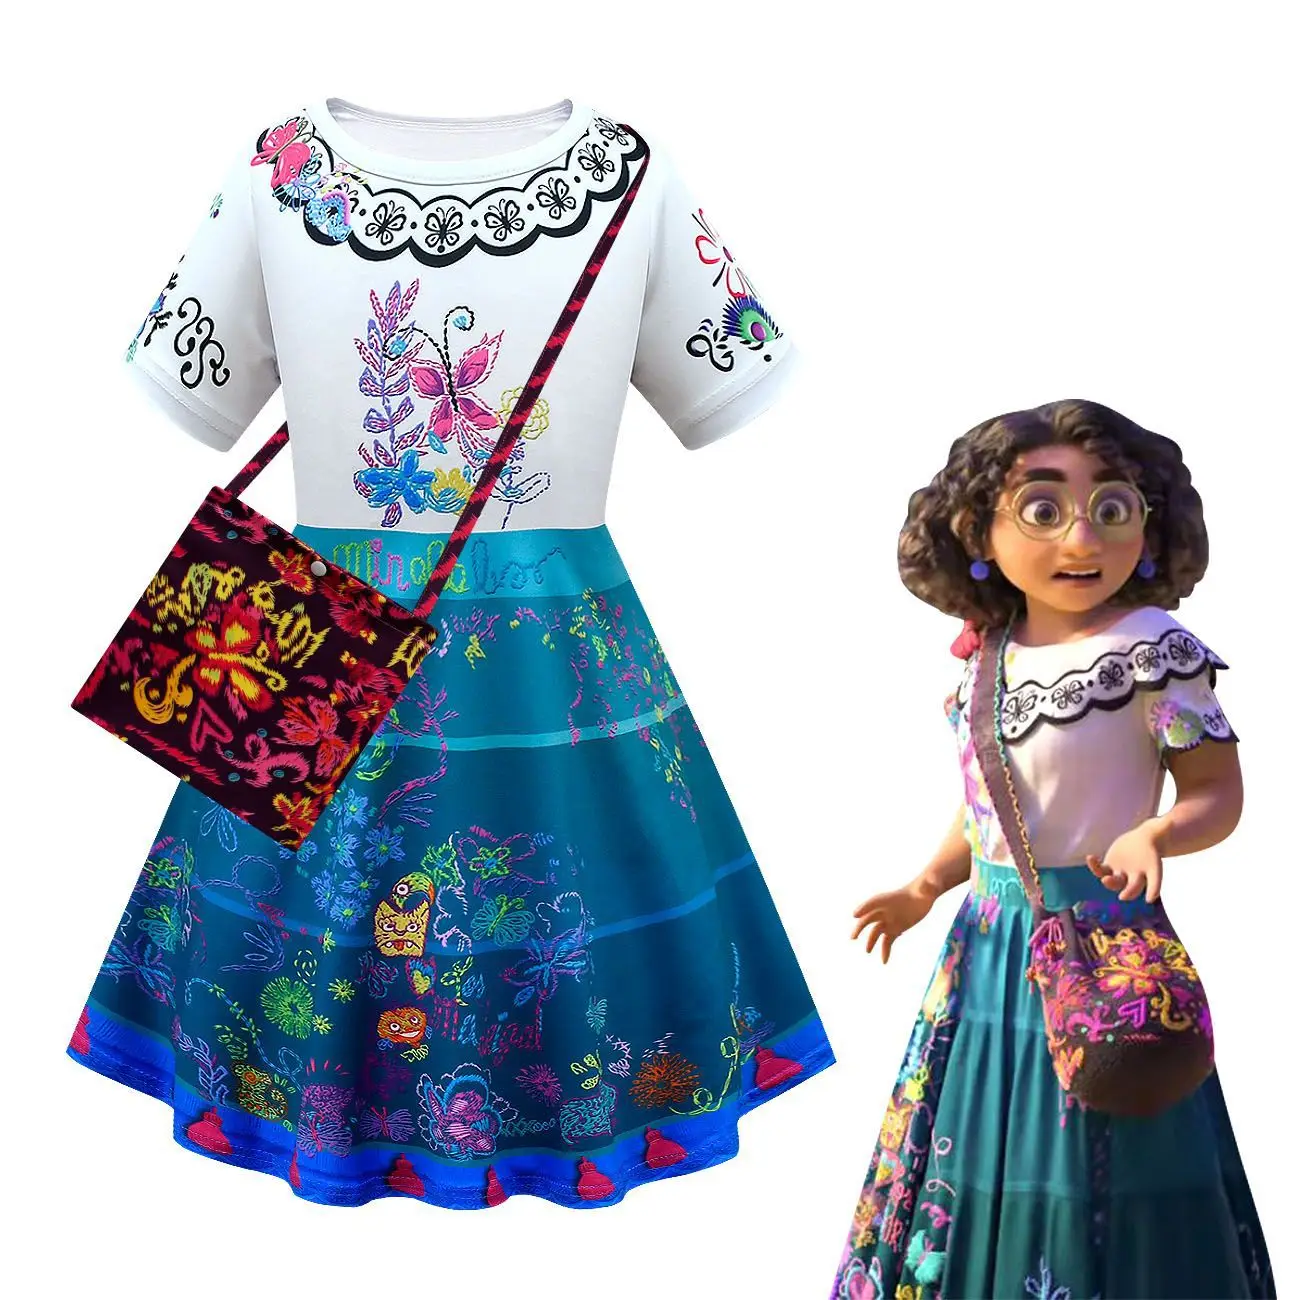 

2022 New Design Tv&Movie Costume Short Fly Sleeve Dresses Kids Girls Encanto Princess Dress with bag, As picture